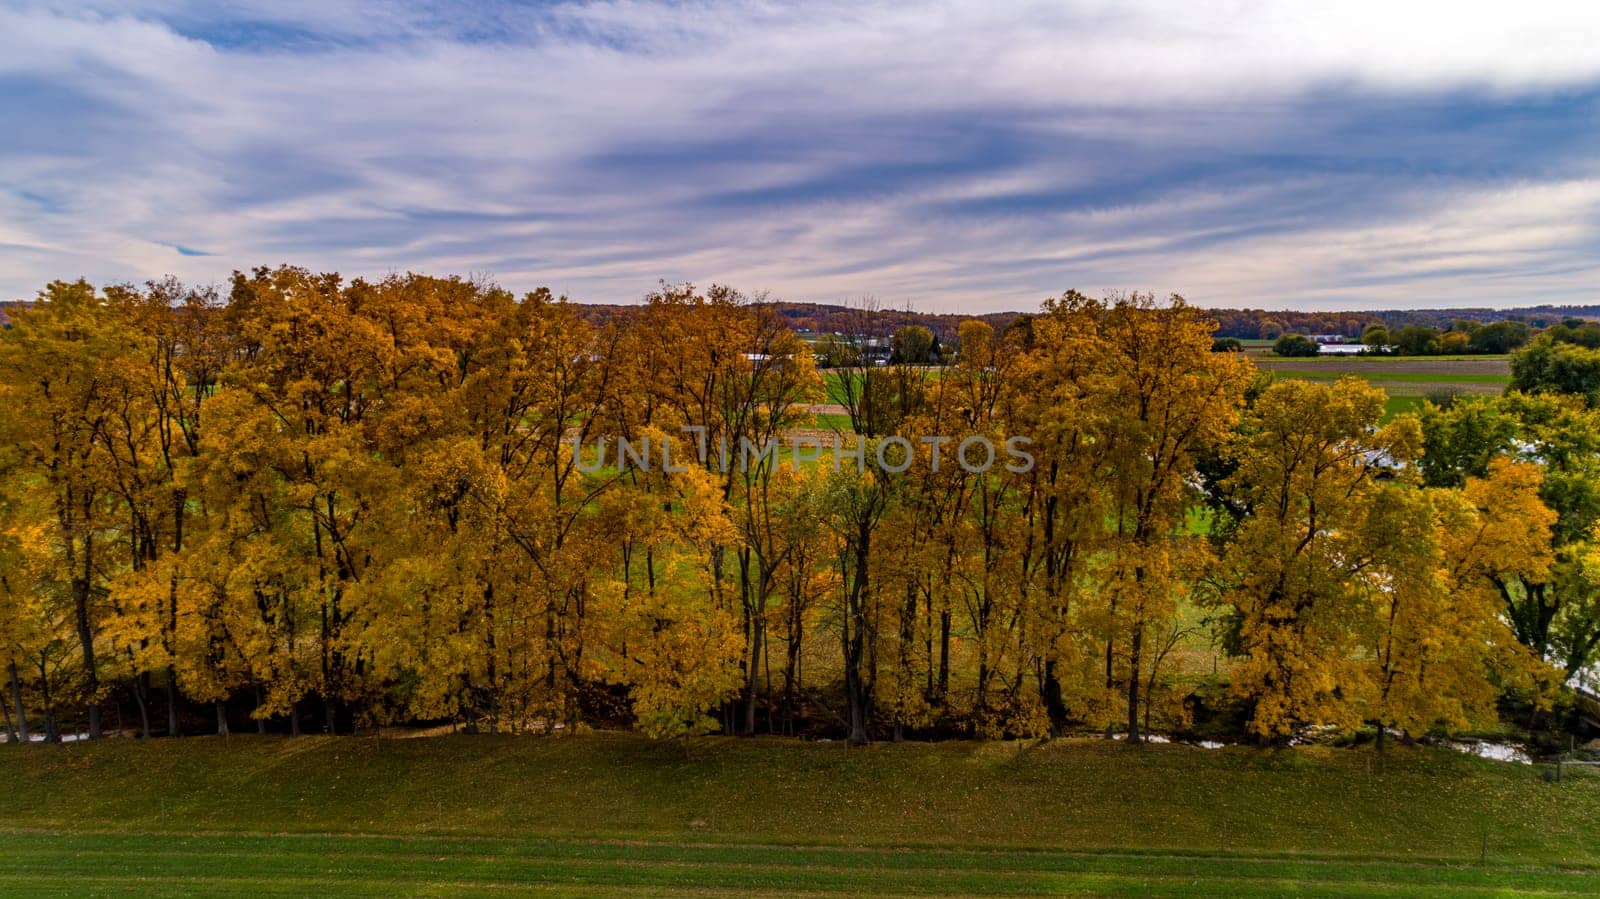 An Aerial View of a Row of Autumn Trees, in Yellow and Orange Colors, on a Sunny Fall Day